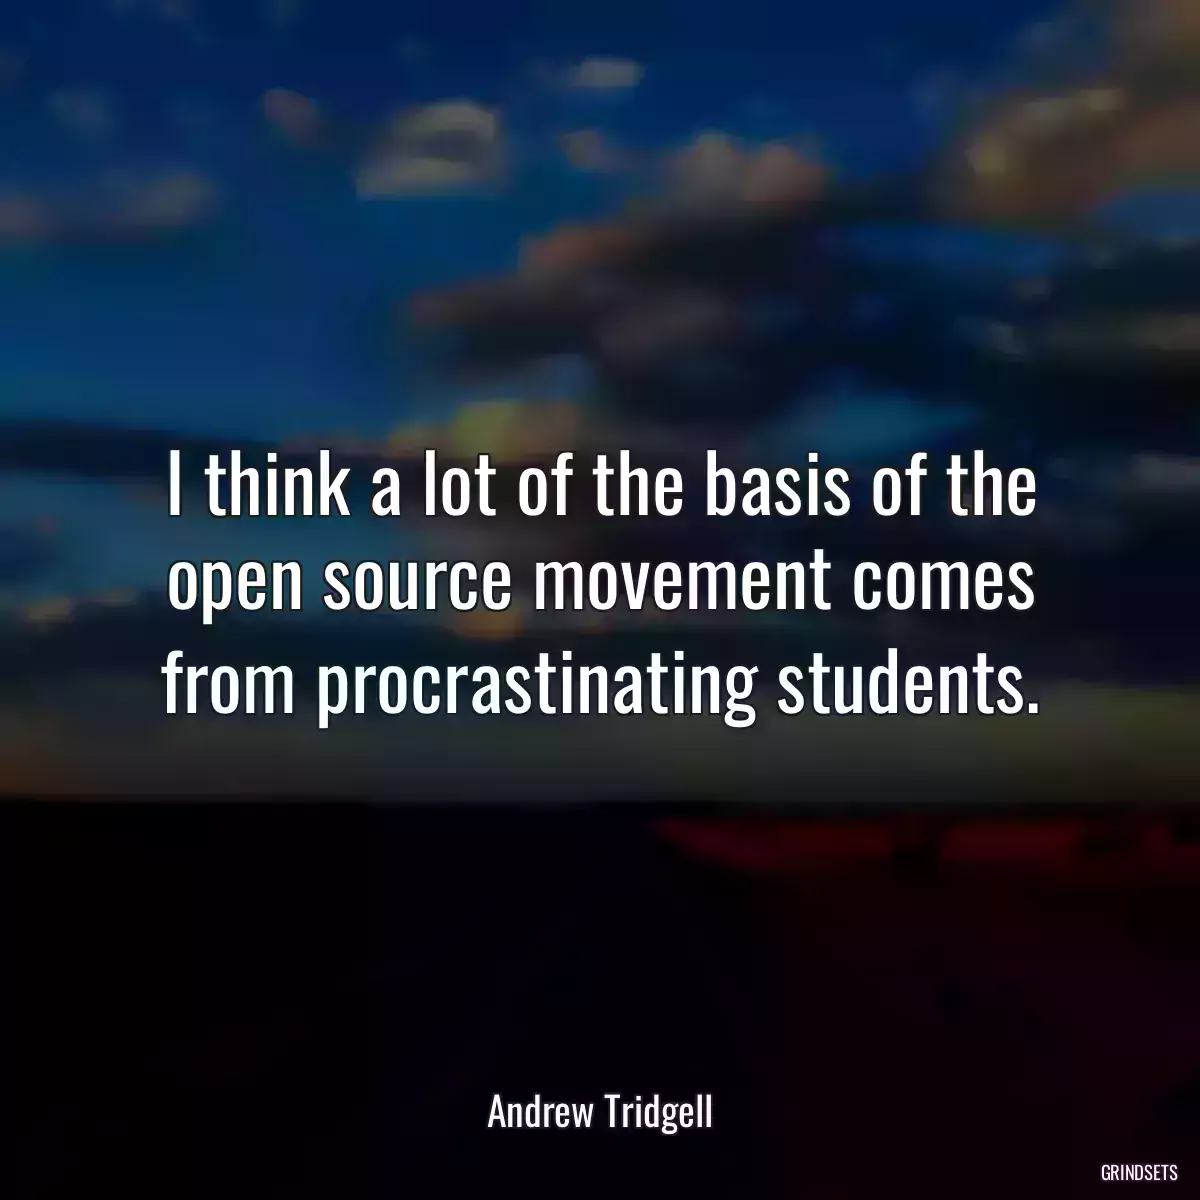 I think a lot of the basis of the open source movement comes from procrastinating students.